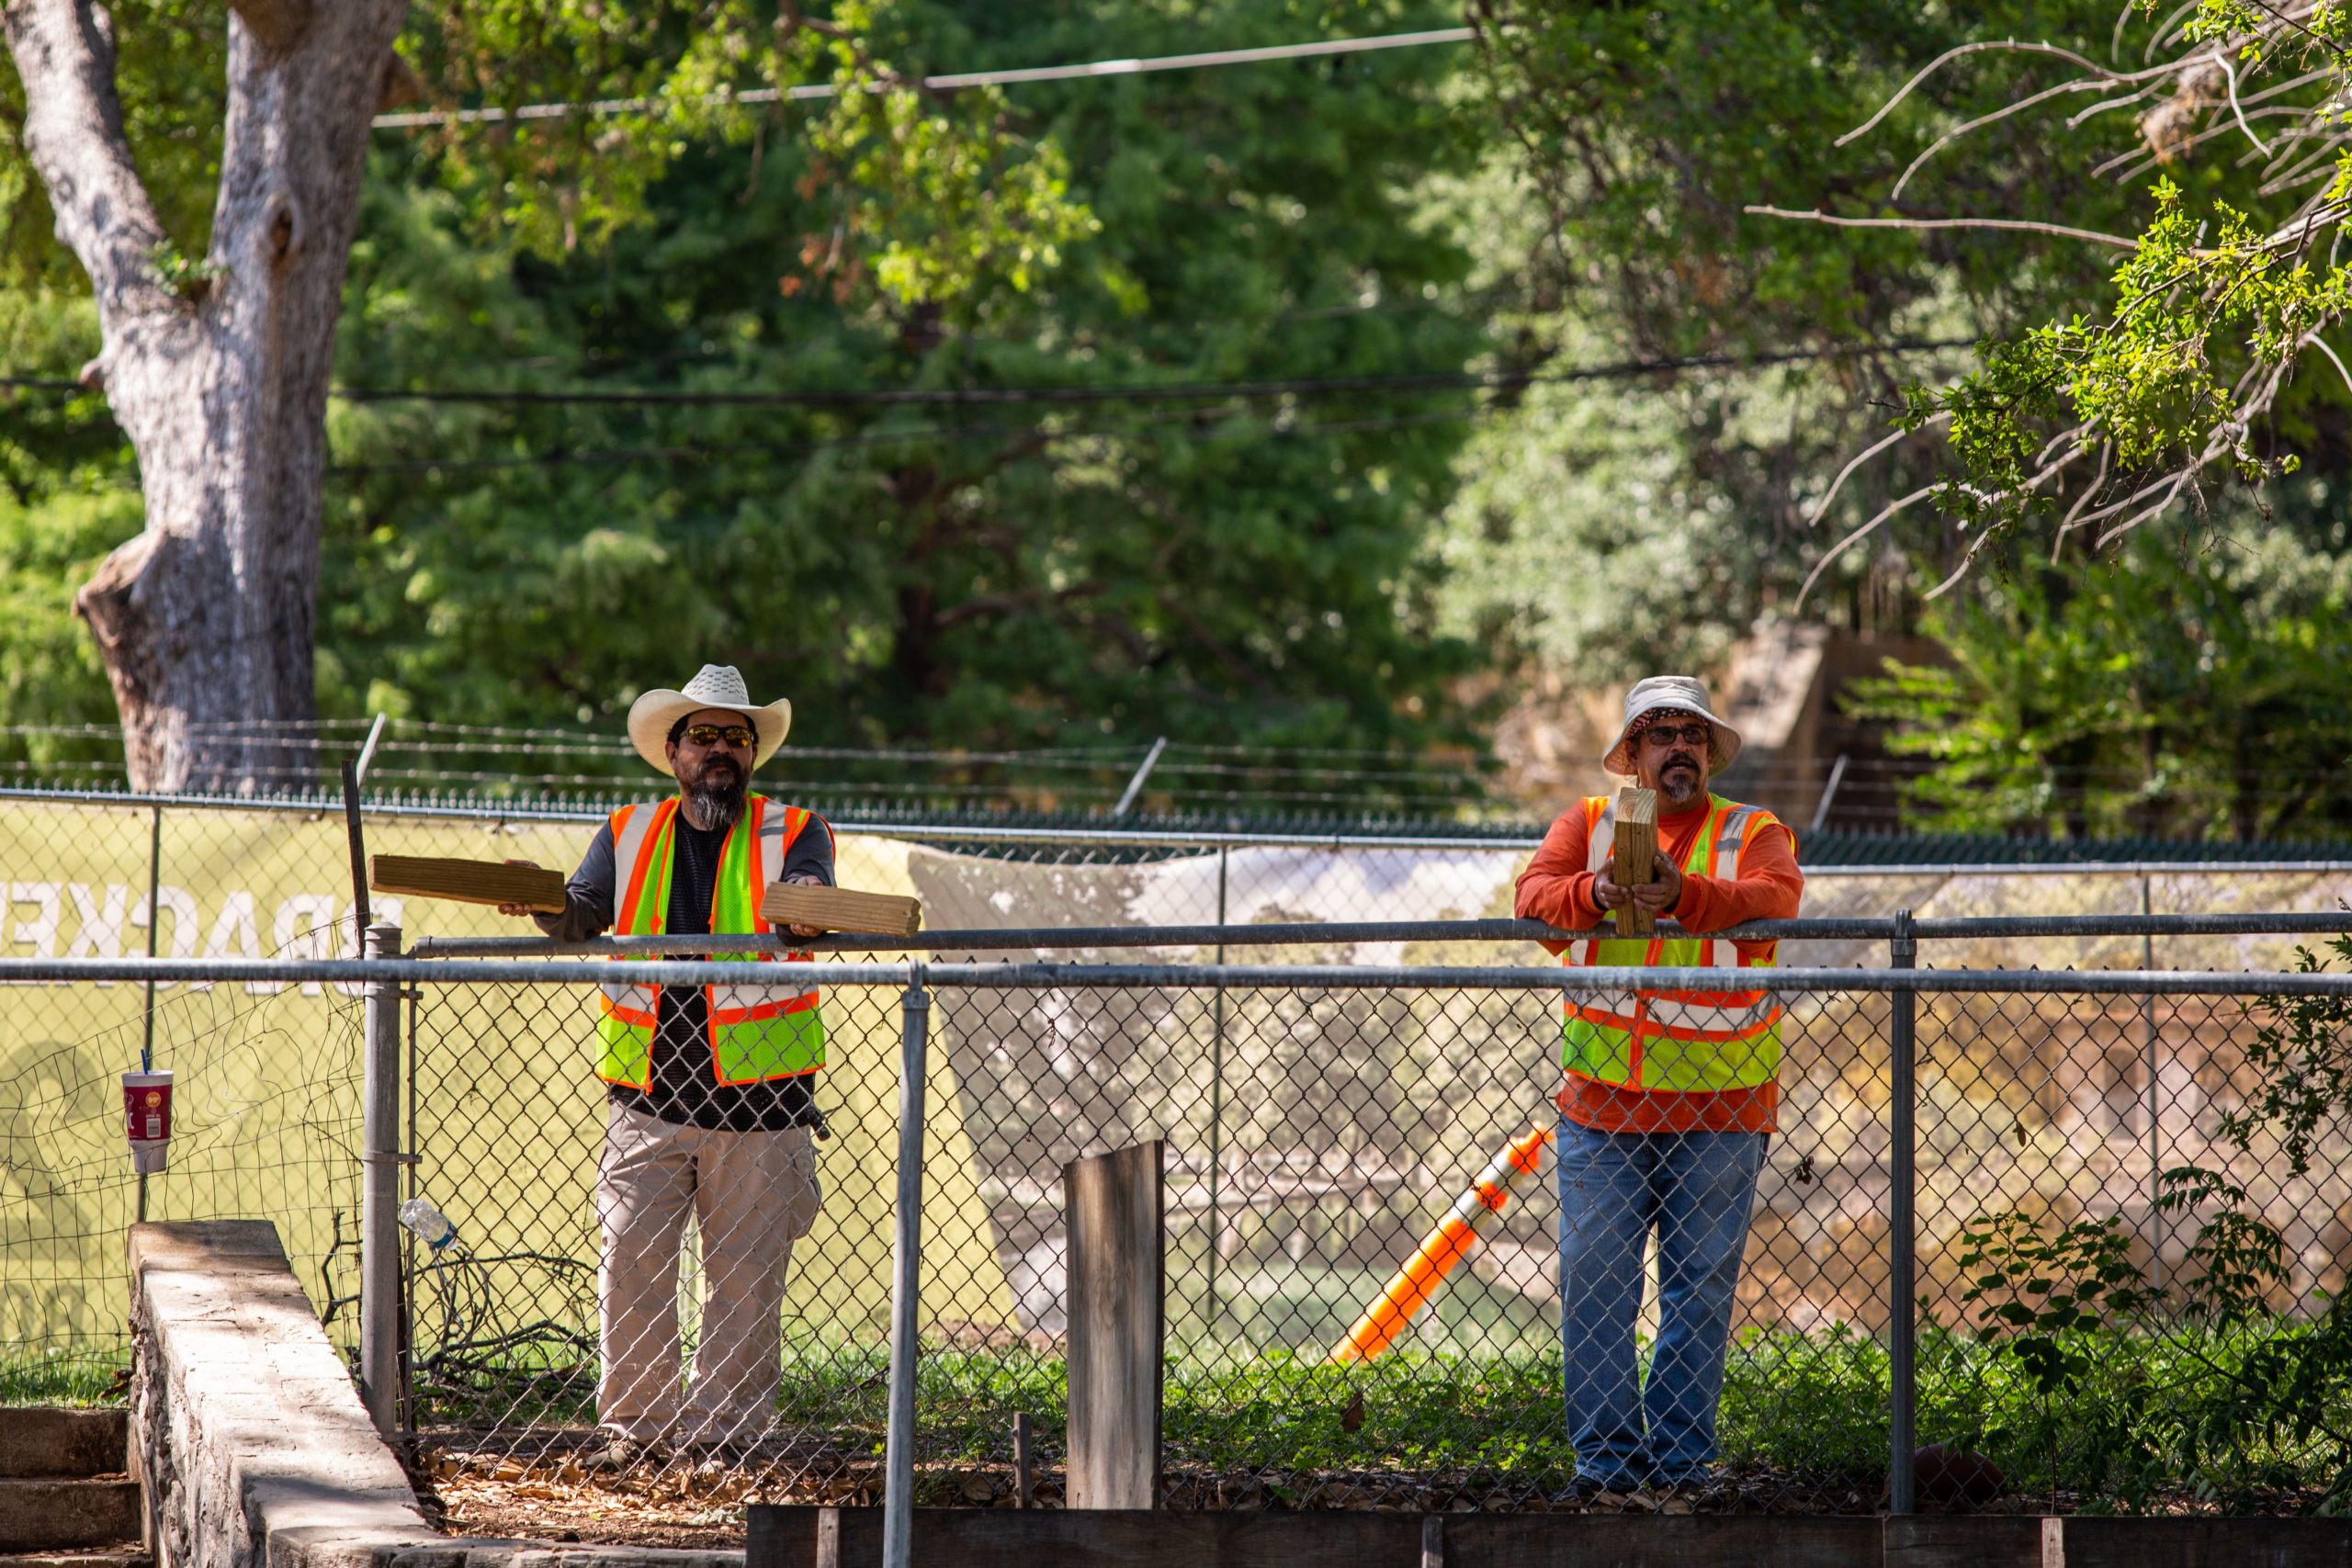 San Antonio City employees hit blocks of wood together to deter migratory birds from nesting and laying eggs in a group of live oak trees bordering the San Antonio River. They are dressed in outdoor hats and safety vests.